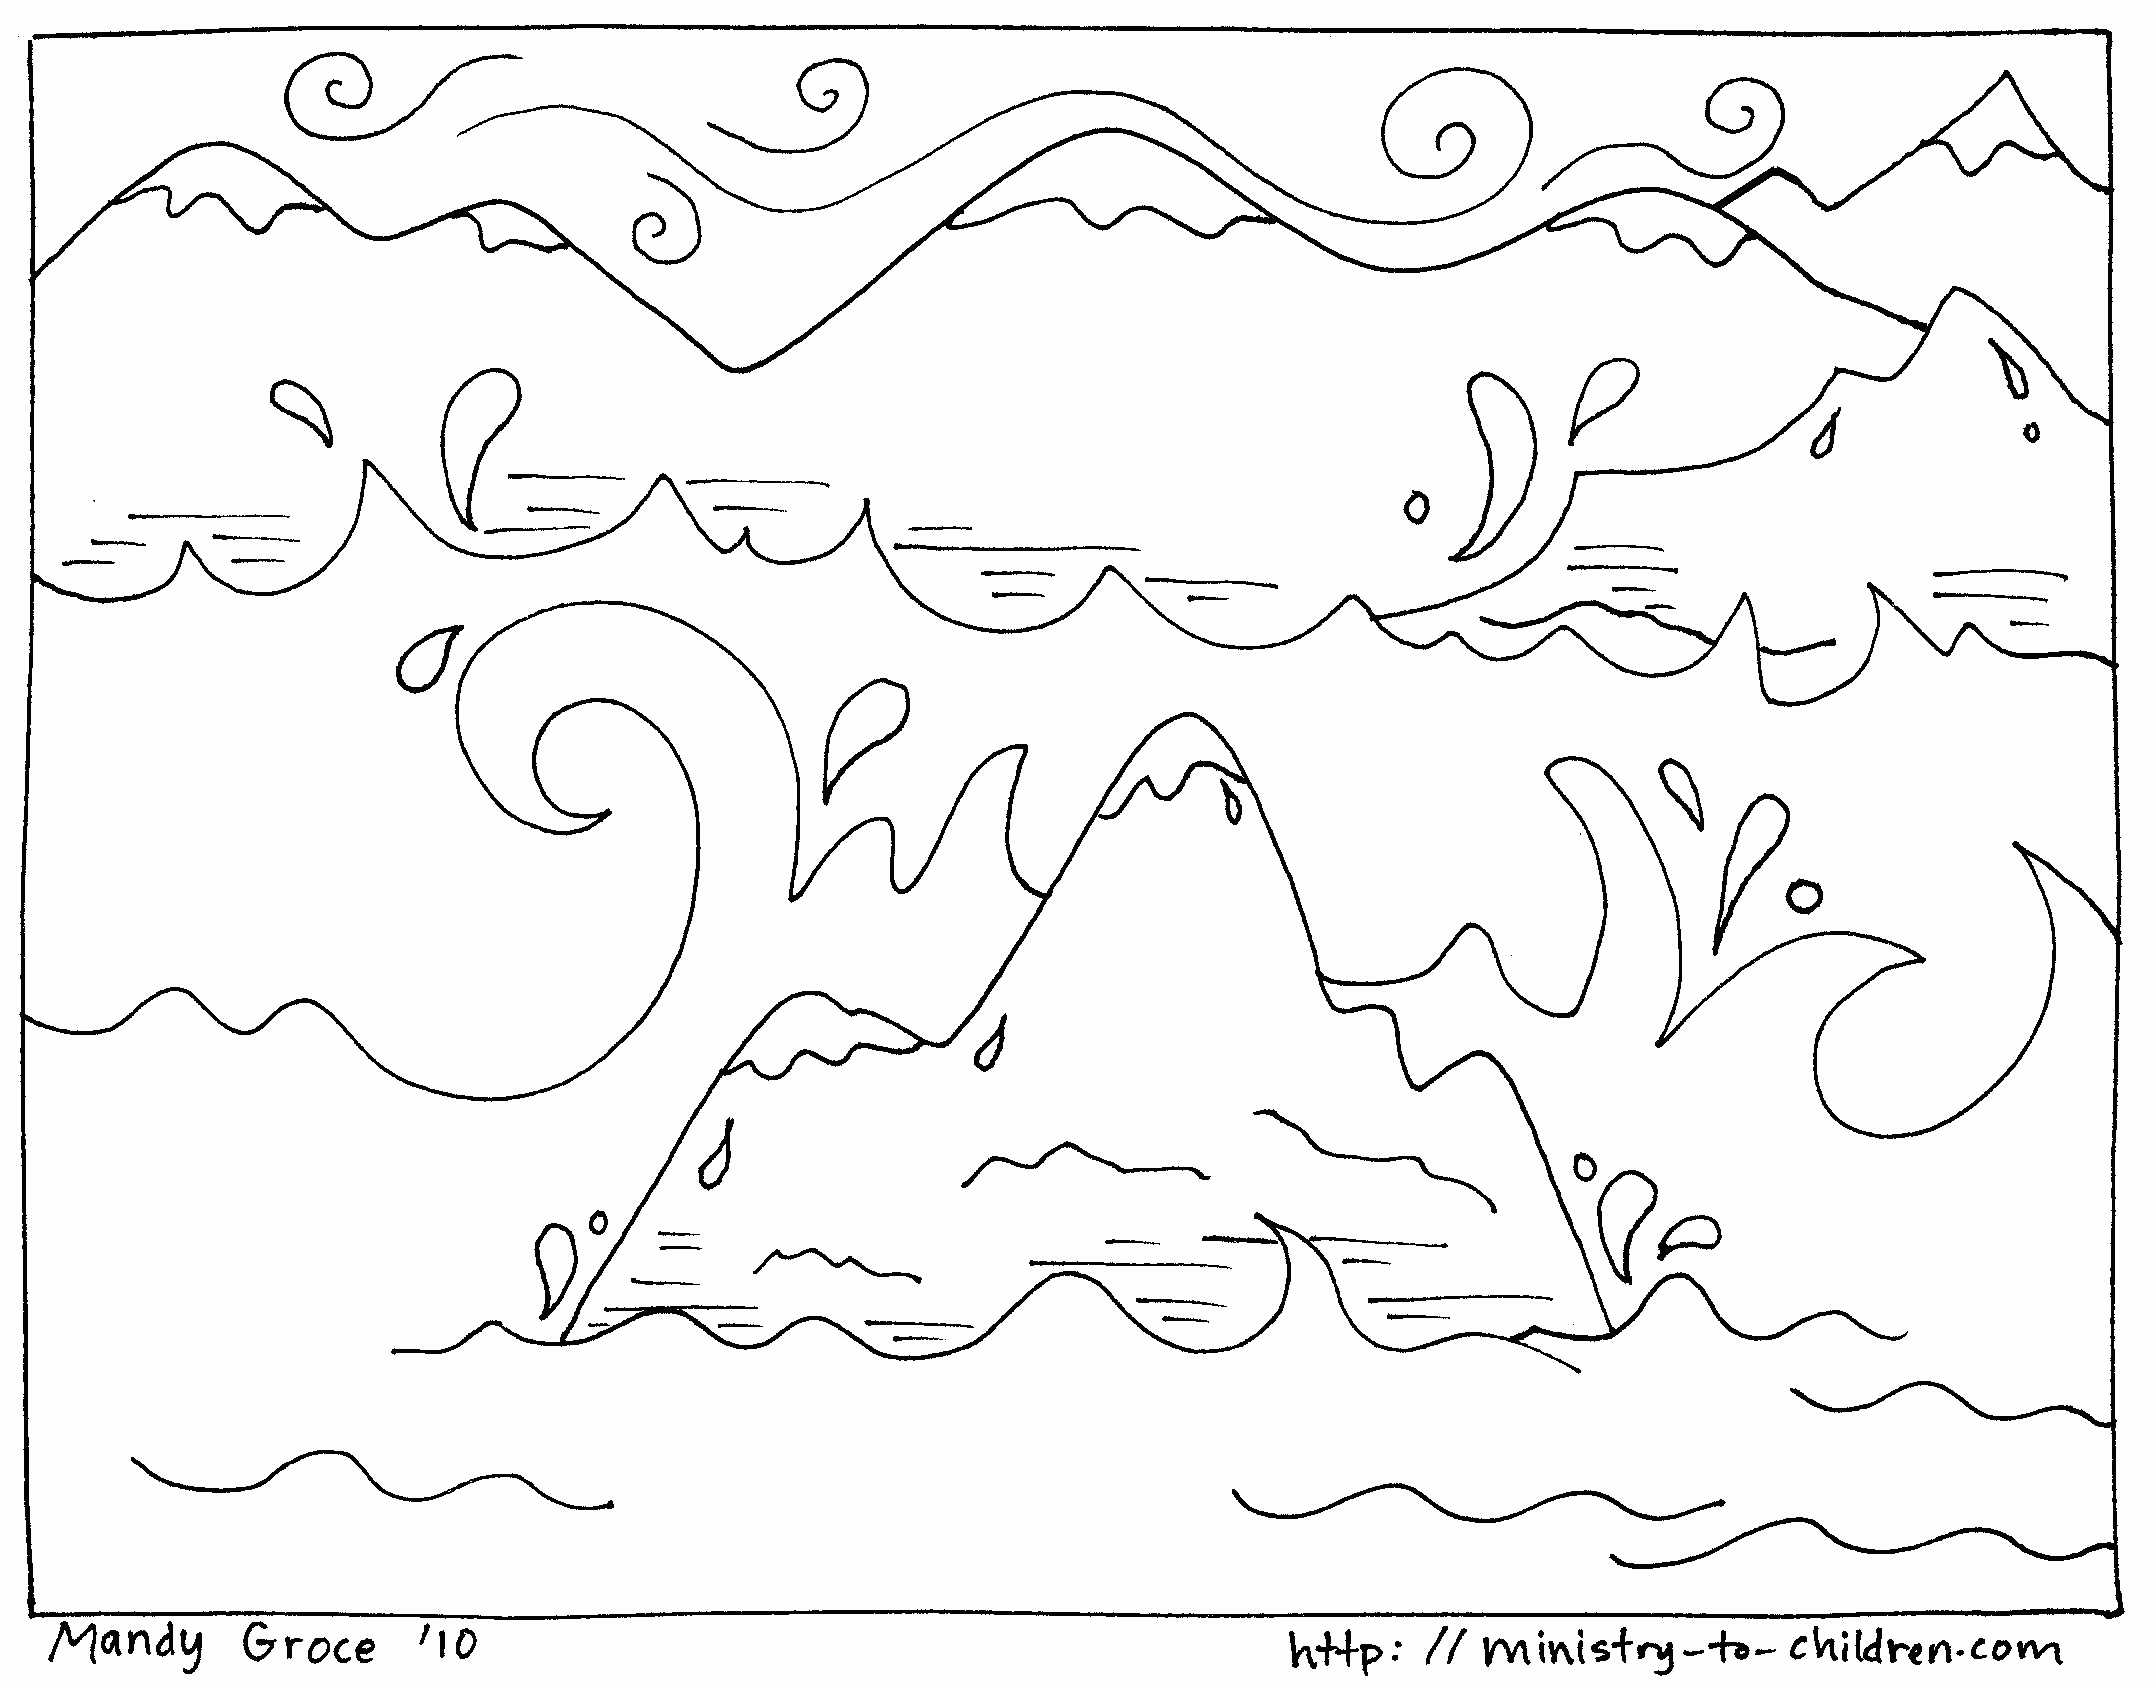 Creation Coloring Pages "God Made the Land" Third Day